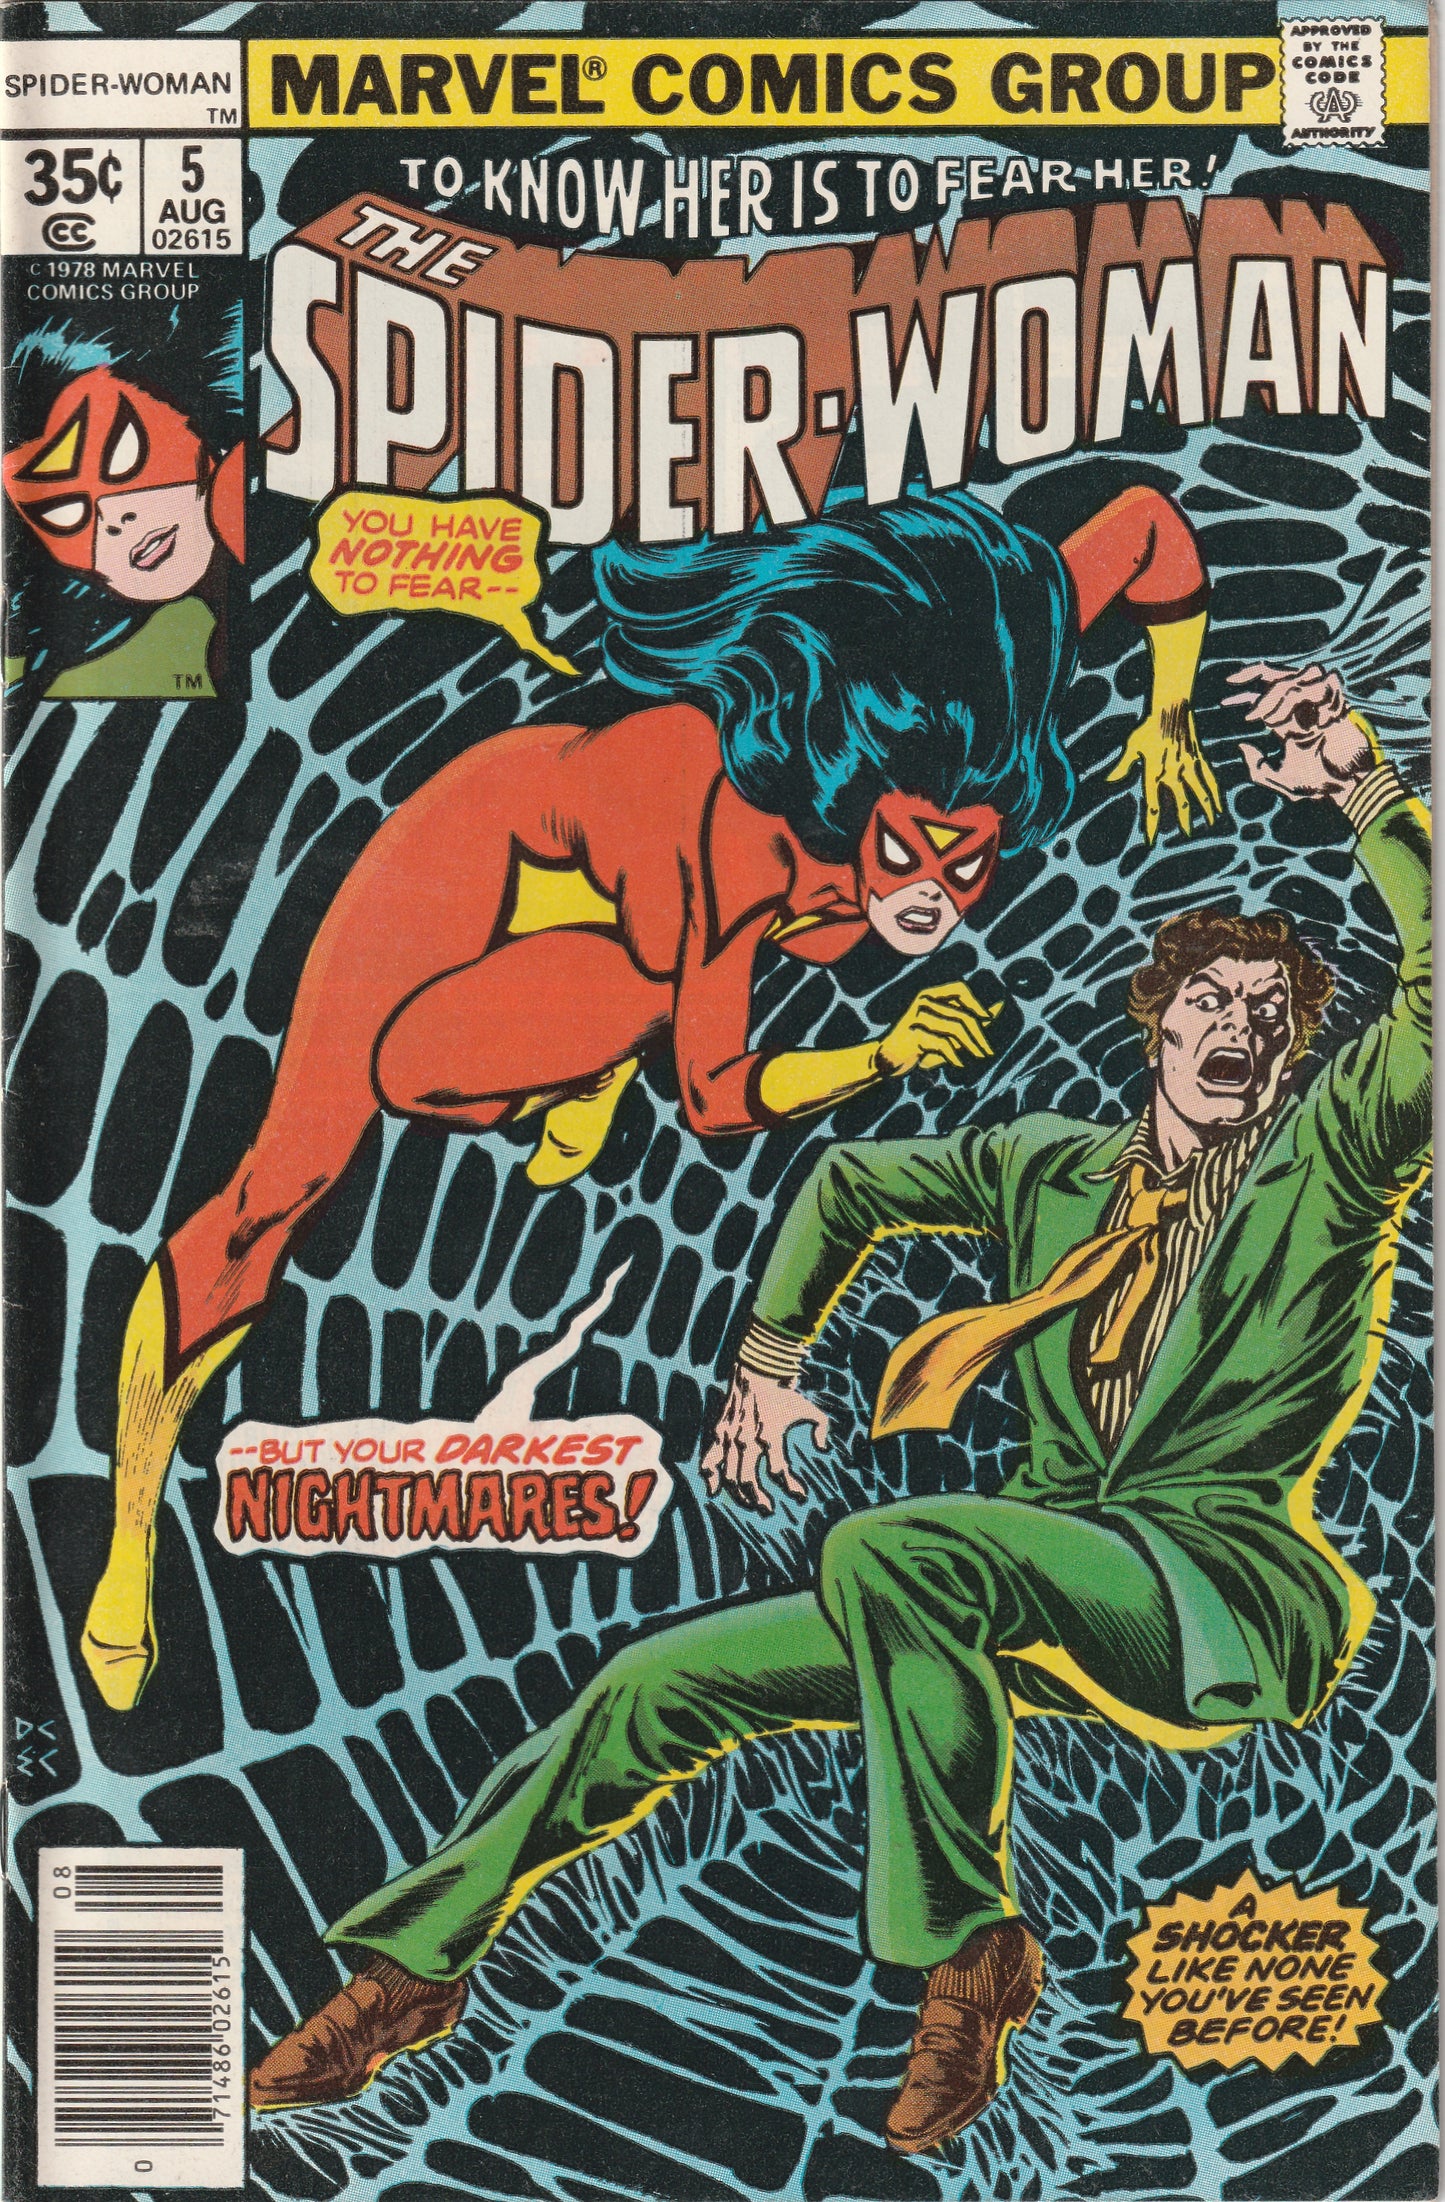 Spider-Woman #5 (1978) - 1st Appearance of Morgan Le Fey Since the Golden Age